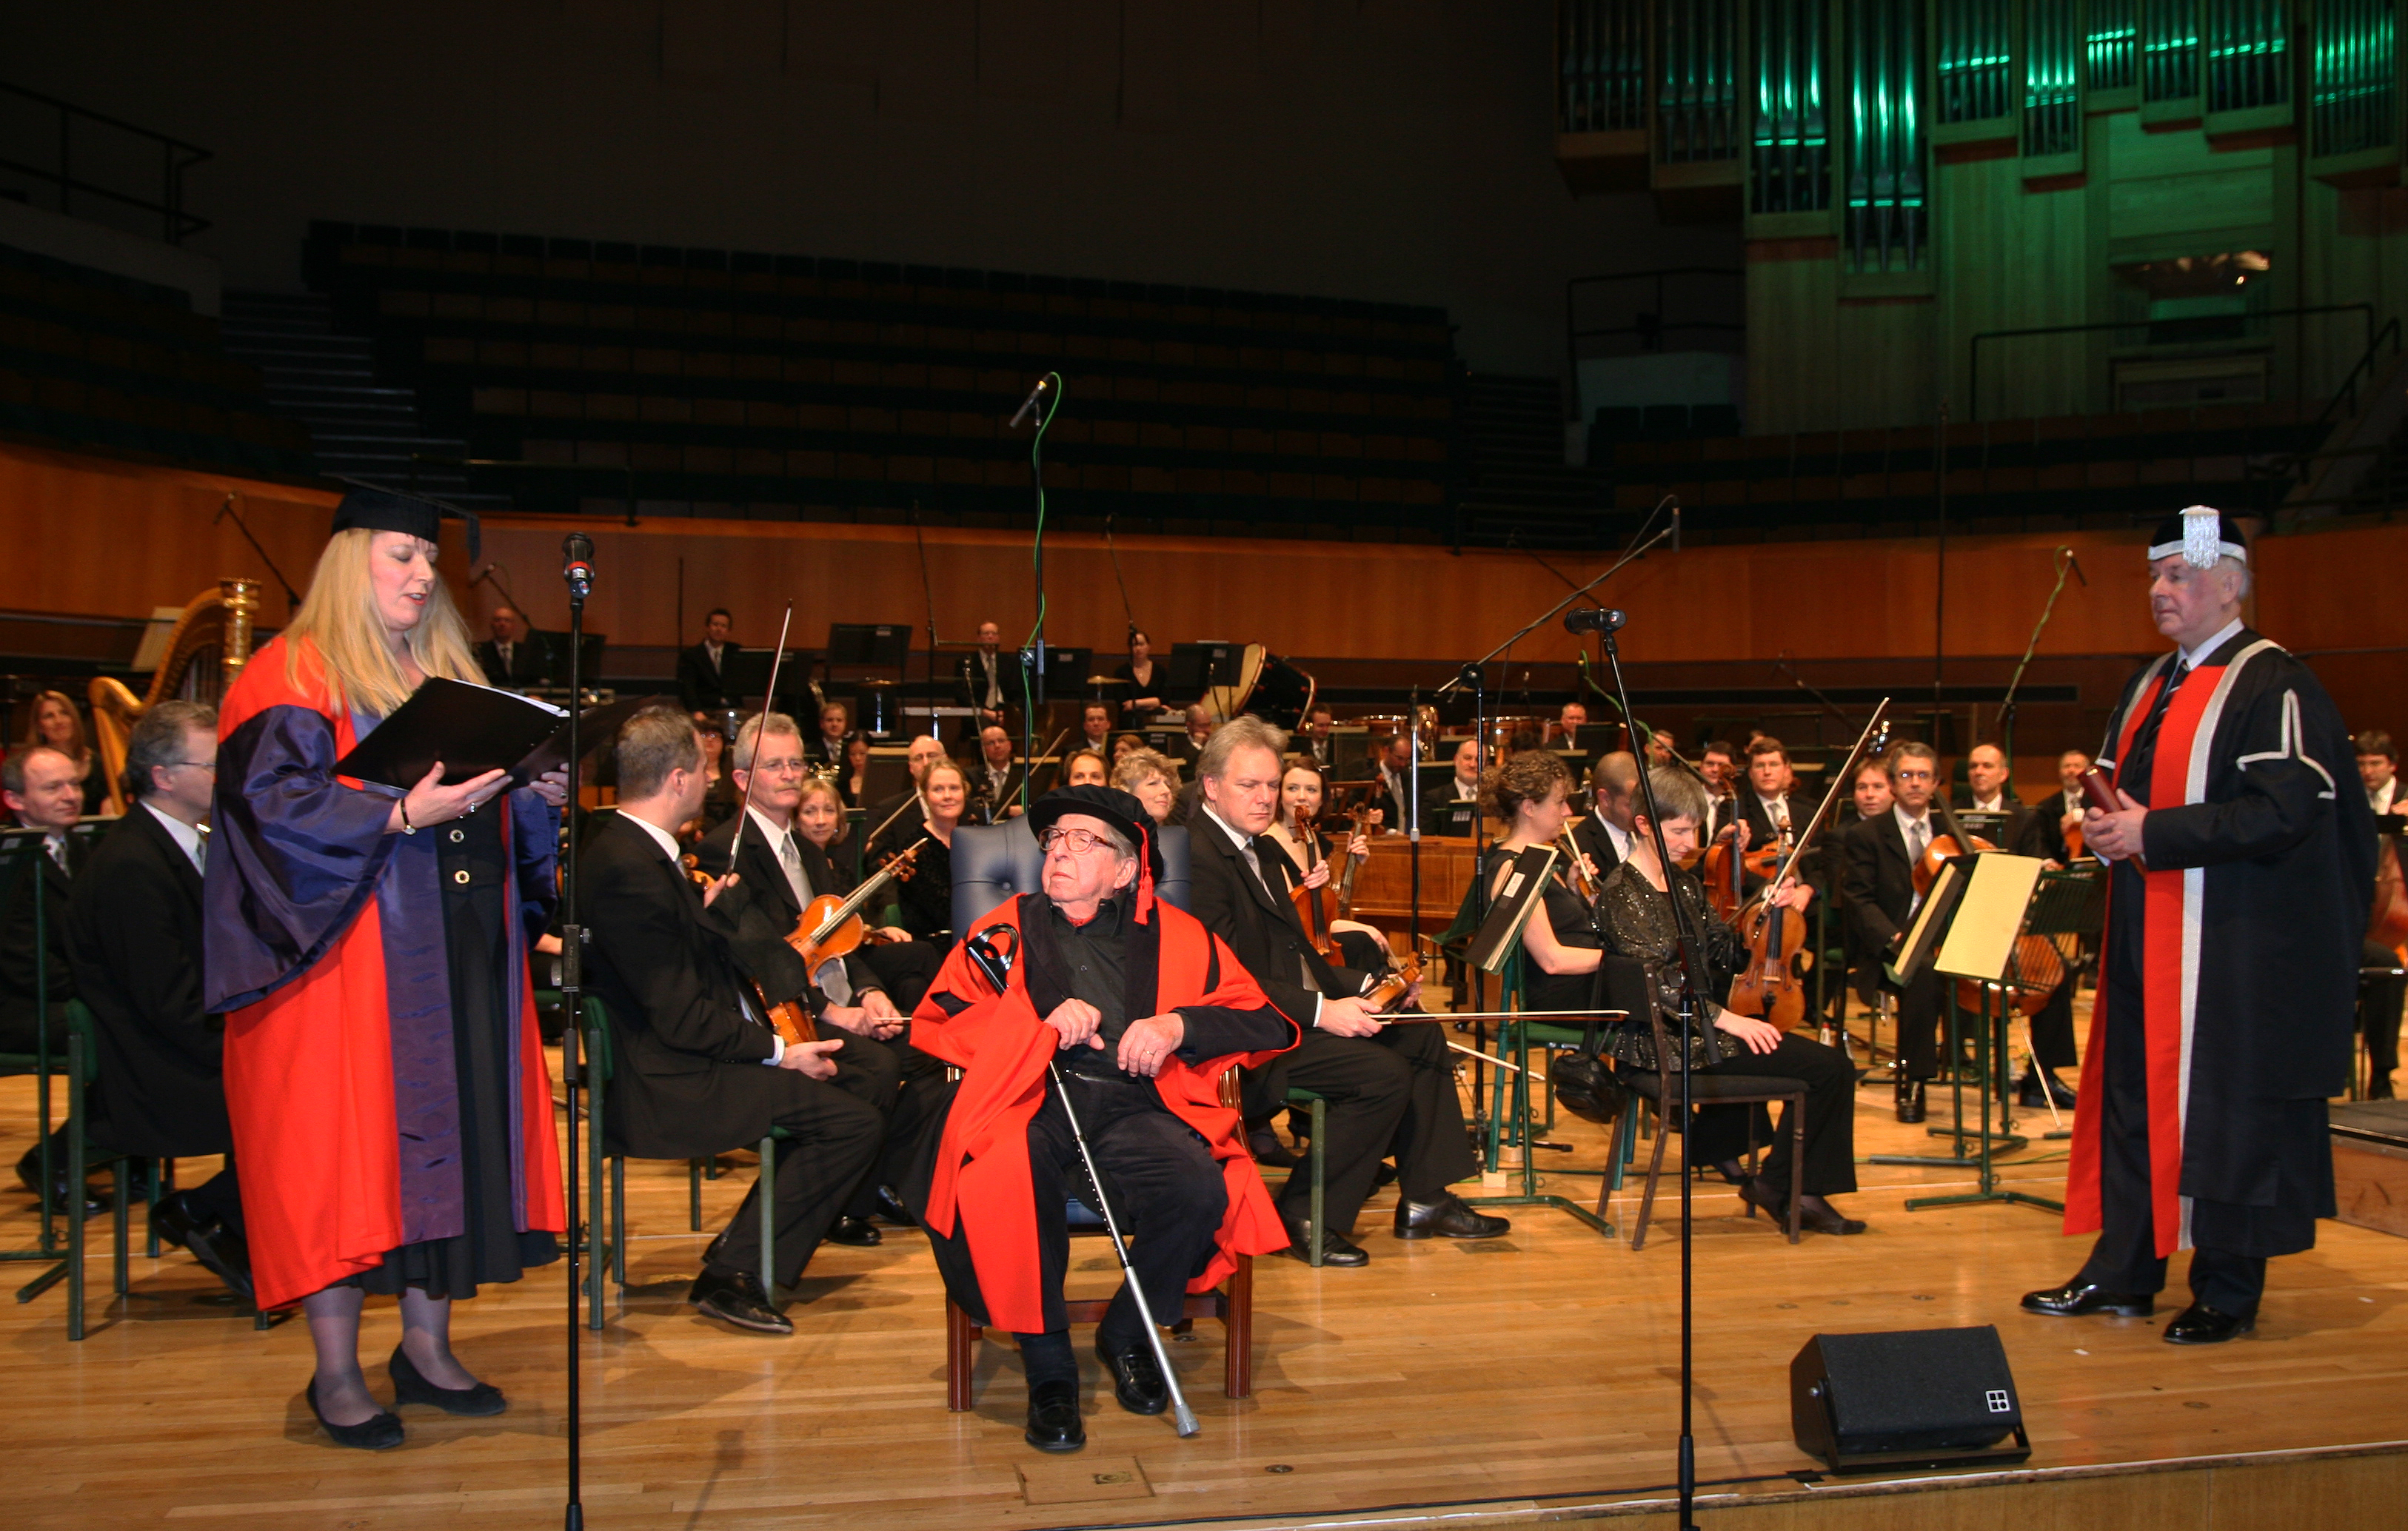  Henri Dutilleux receiving his Honorary Fellowship from Cardiff University at St David's Hall, 2008. (left to right: Caroline Rae, Henri Dutilleux, Vice-Chancellor Dr David Grant & BBC NOW © Peter Whittaker